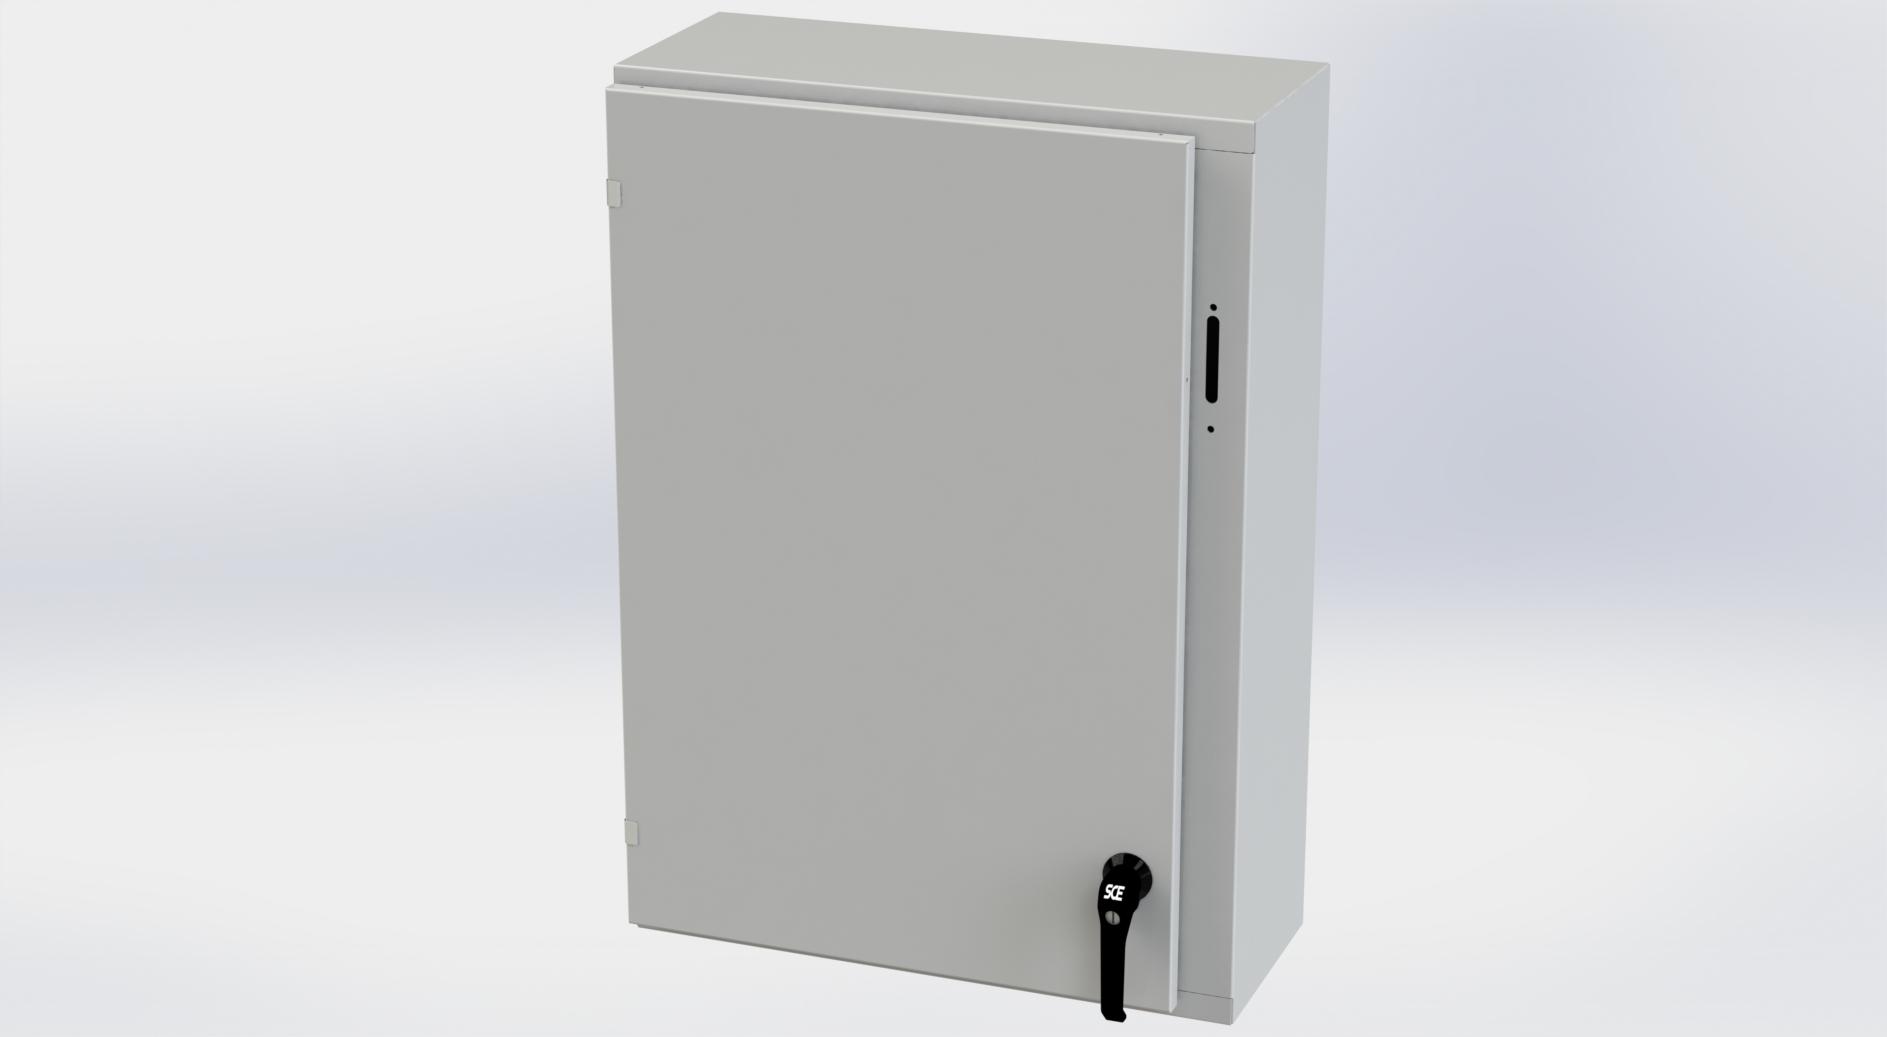 Saginaw Control SCE-36XEL2510LPLG XEL LP Enclosure, Height:36.00", Width:25.38", Depth:10.00", RAL 7035 gray powder coating inside and out. Optional sub-panels are powder coated white.